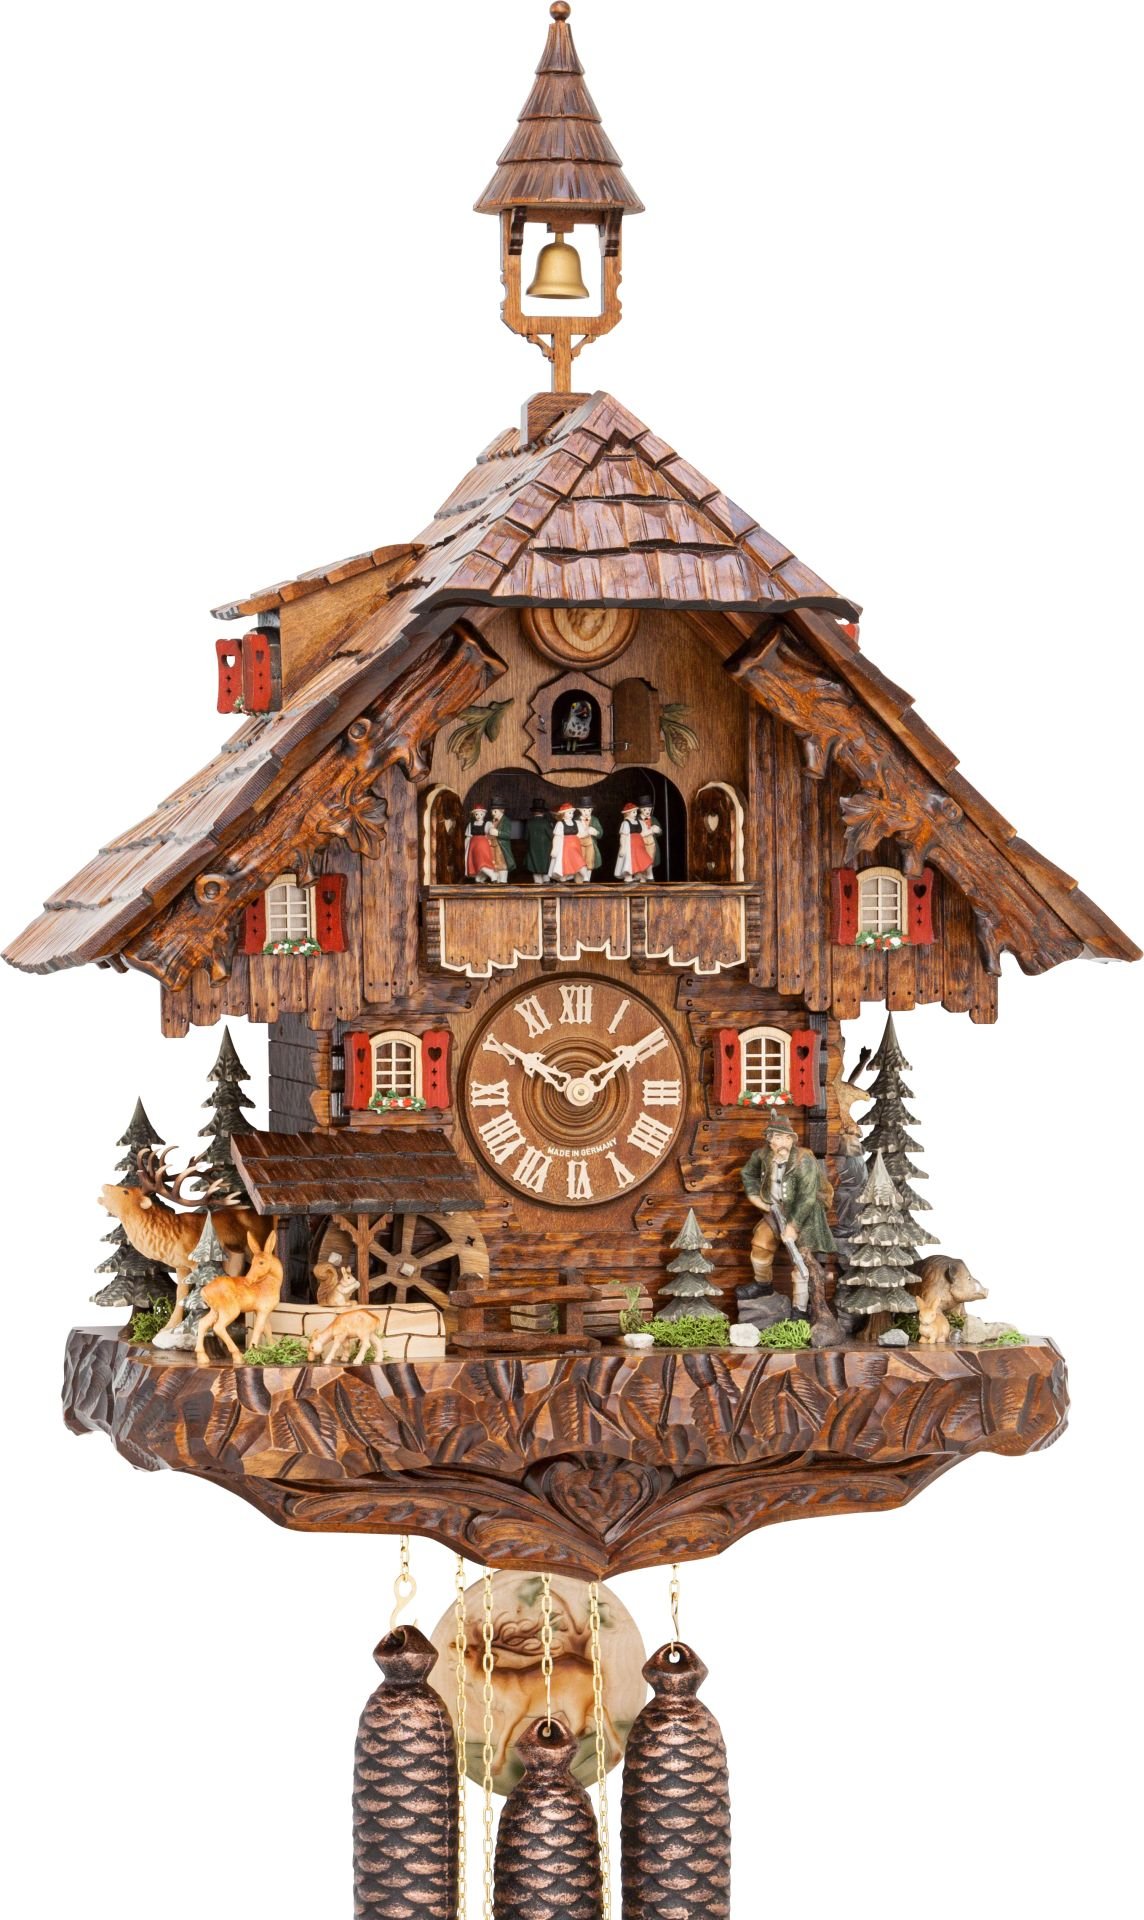 Cuckoo Clock Chalet Style 8 Day Movement 68cm by Hekas